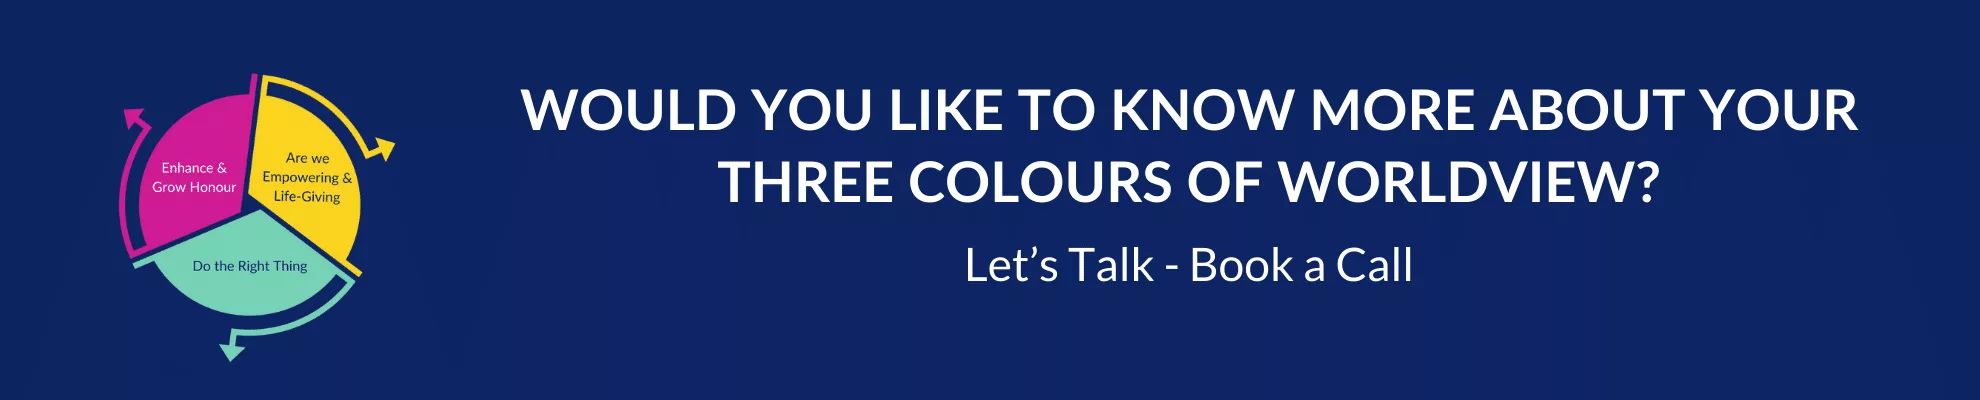 Three Colours of Worldview - Book a Call